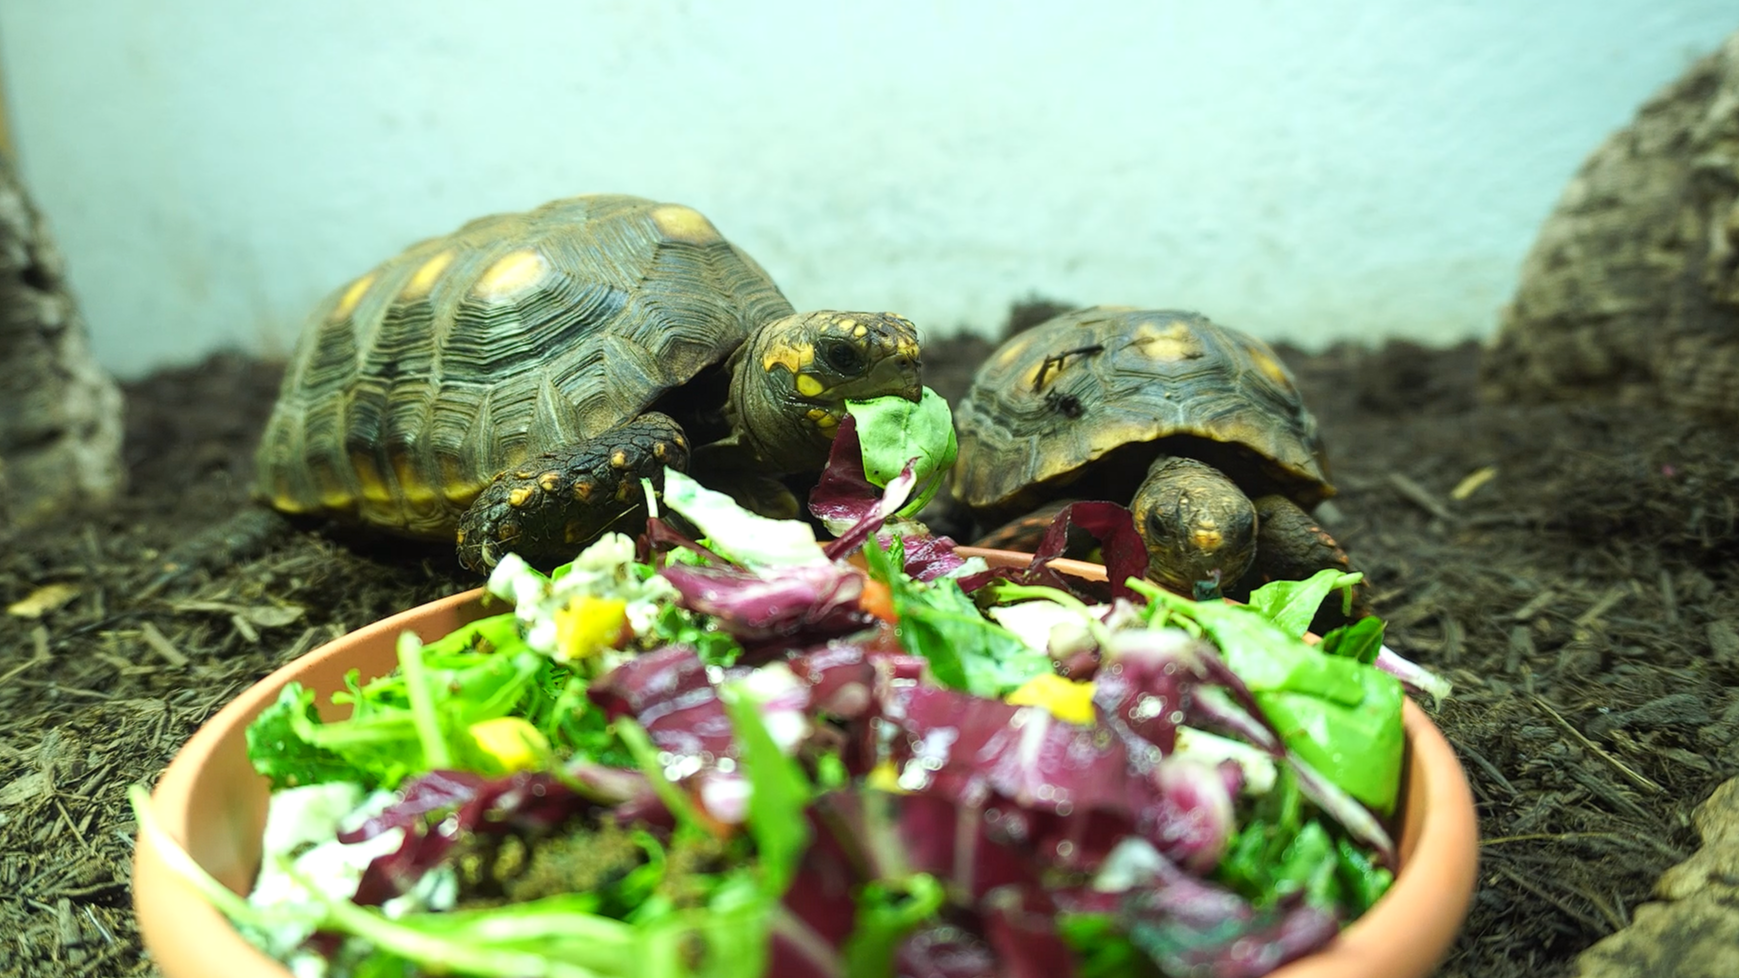 Fruits, greens and bugs: the colourful weight loss program of the reptiles of the BIOPARC Fuengirola